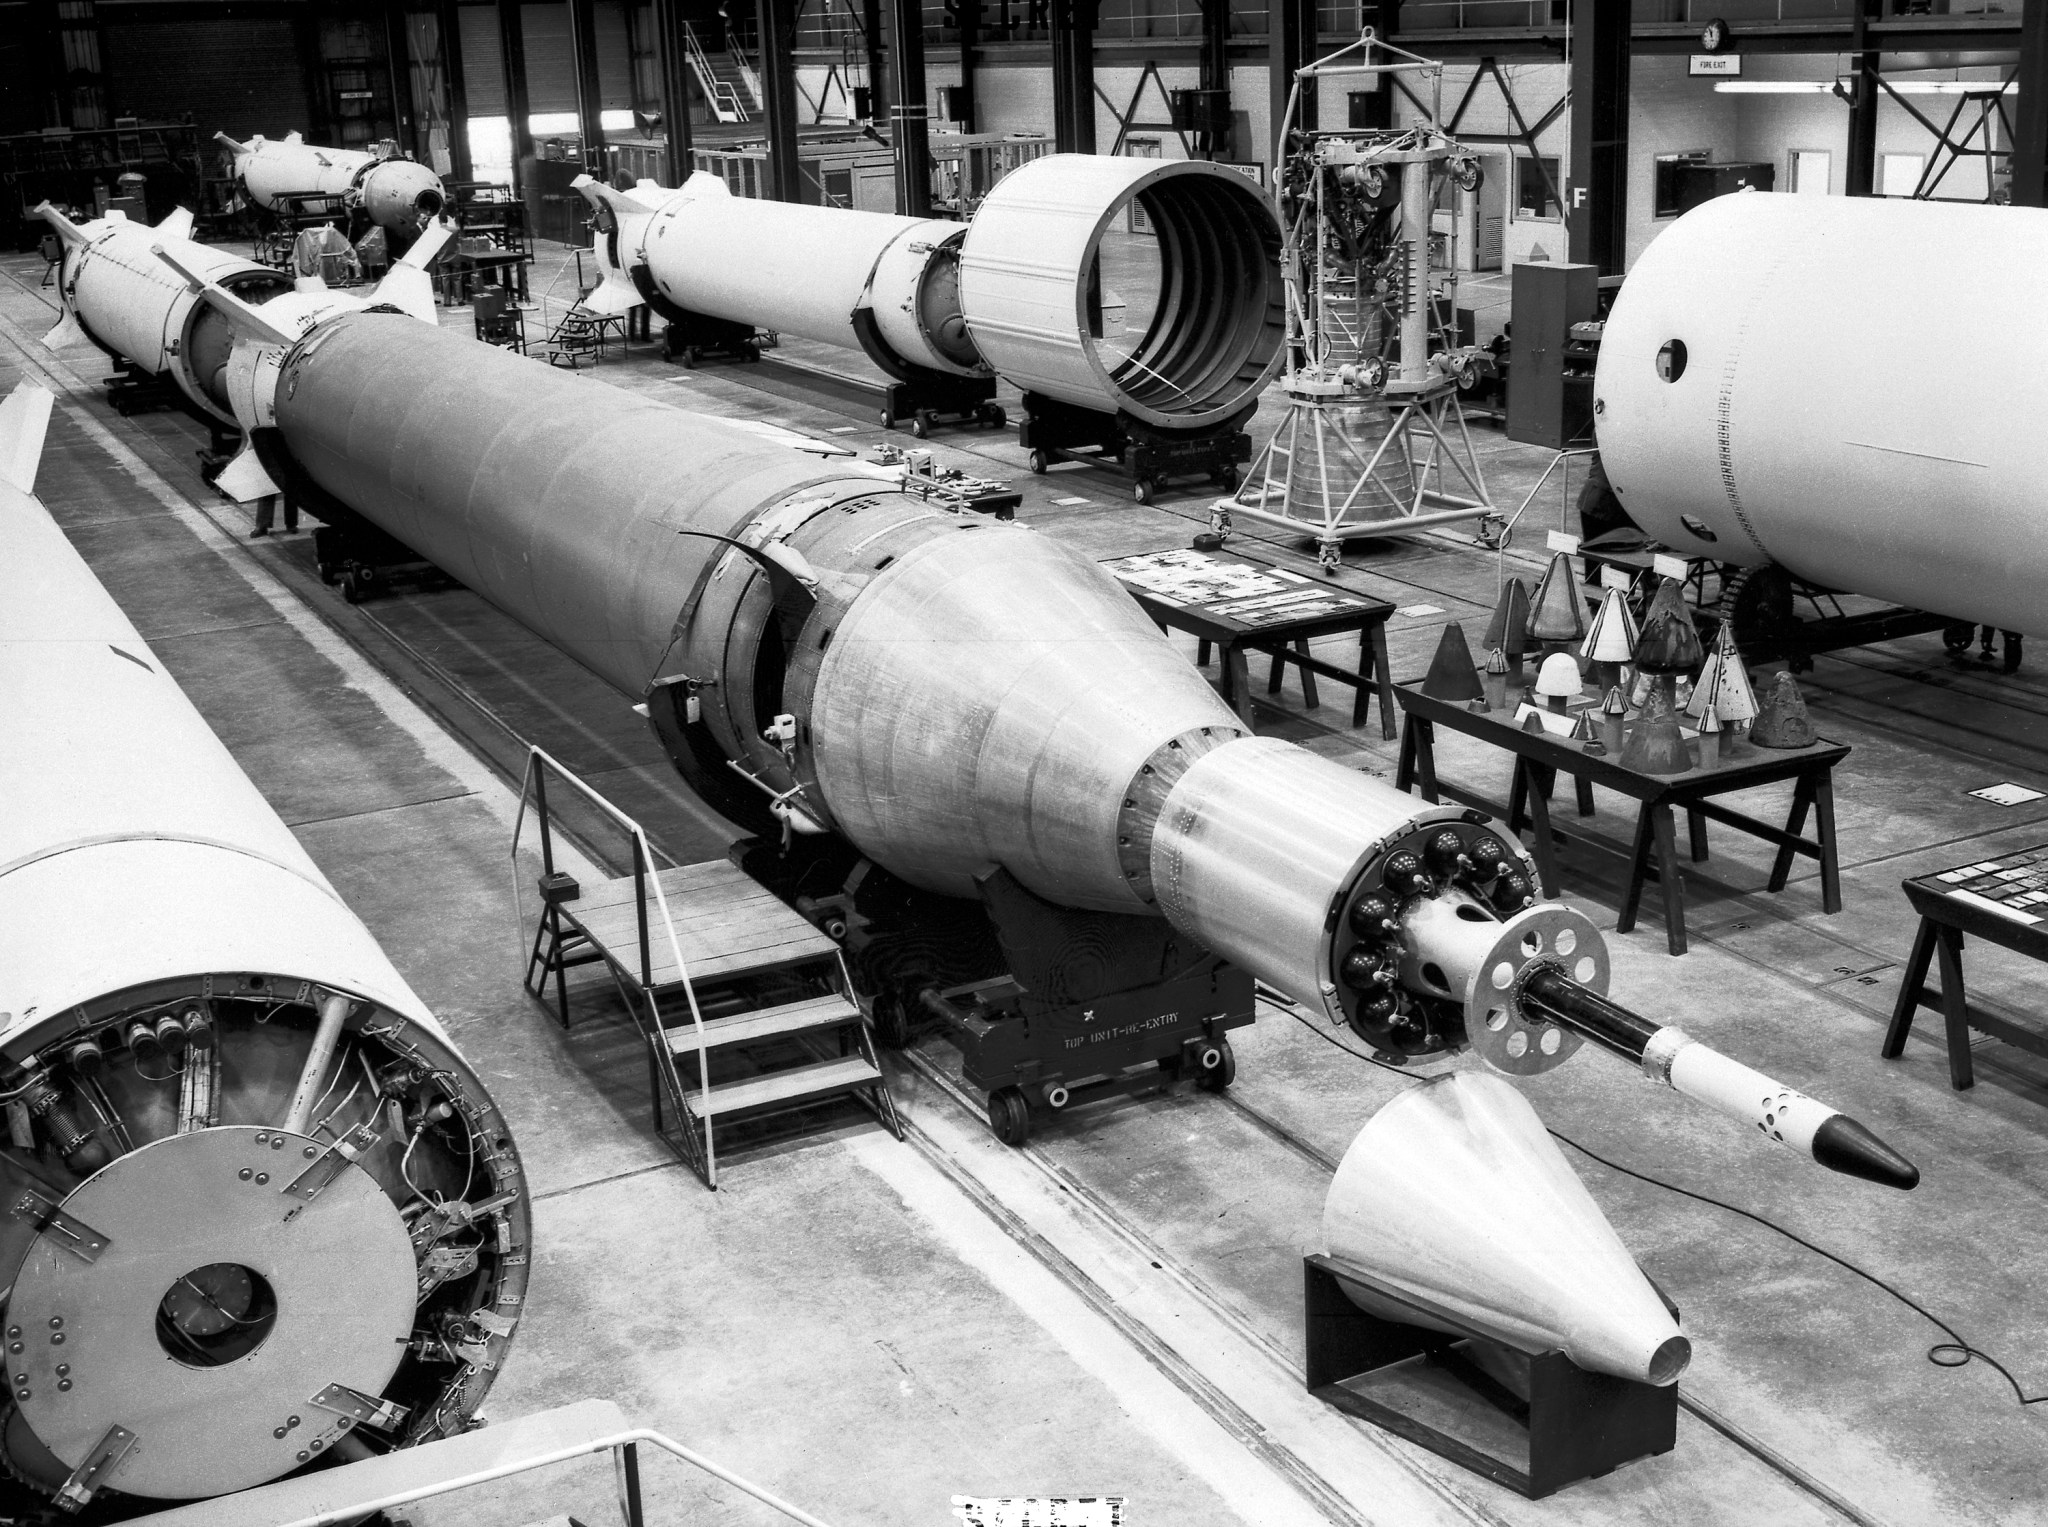 Jupiter-C Missile No. 27 assembly at the Army Ballistic Missile Agency (ABMA), Redstone Arsenal, in Huntsville, Alabama. 